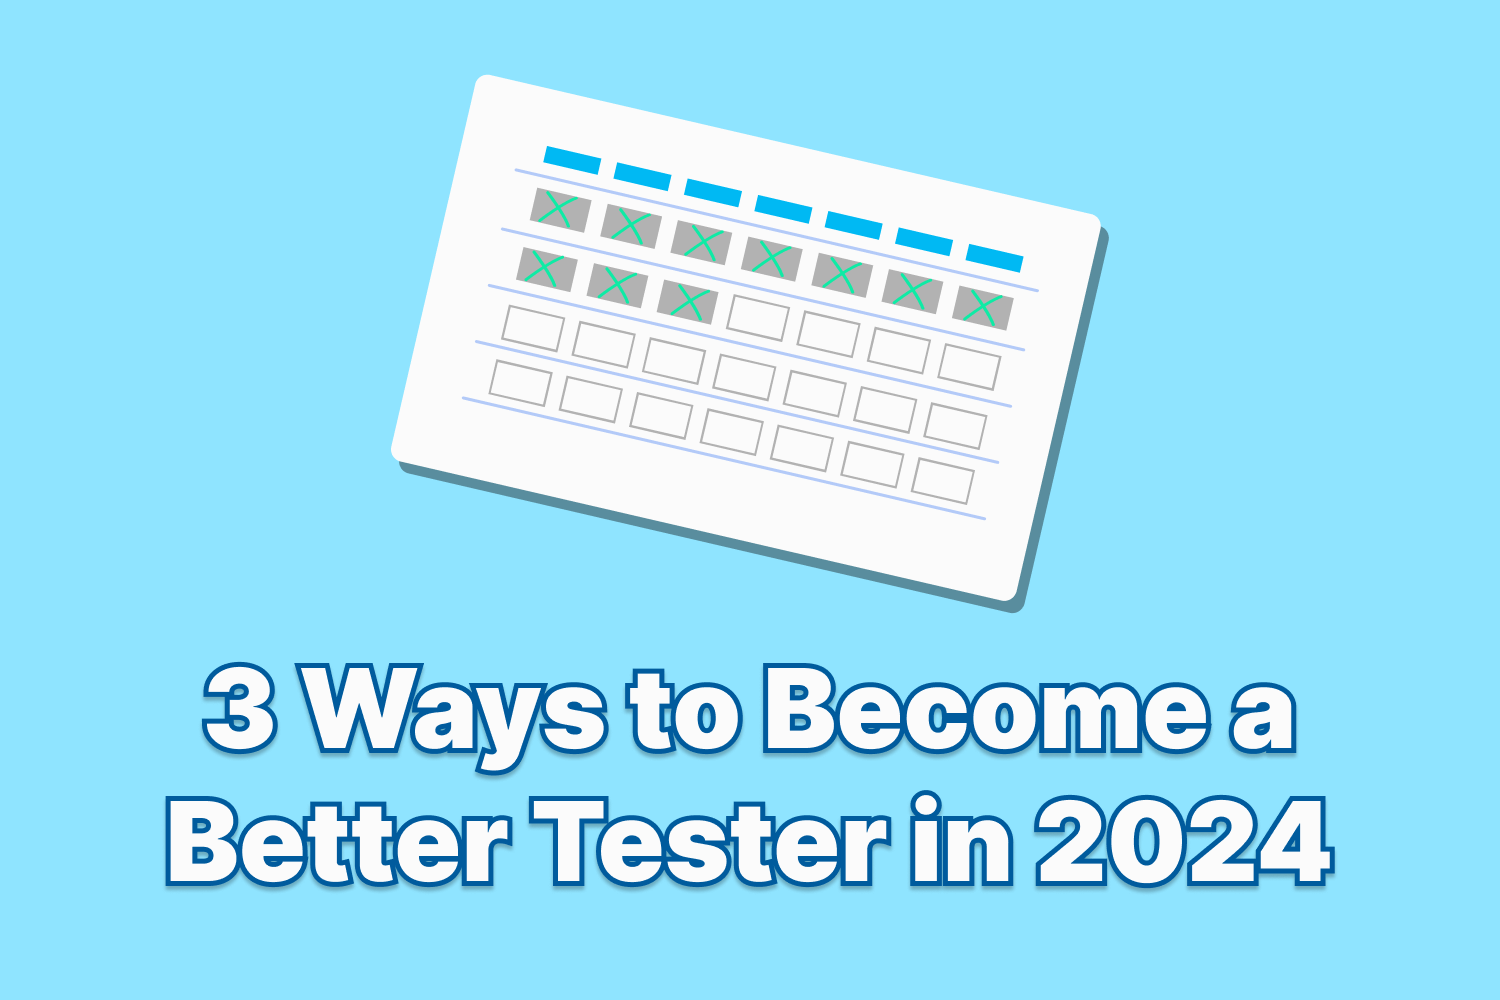 3 Ways to Become a Better Tester in 2024